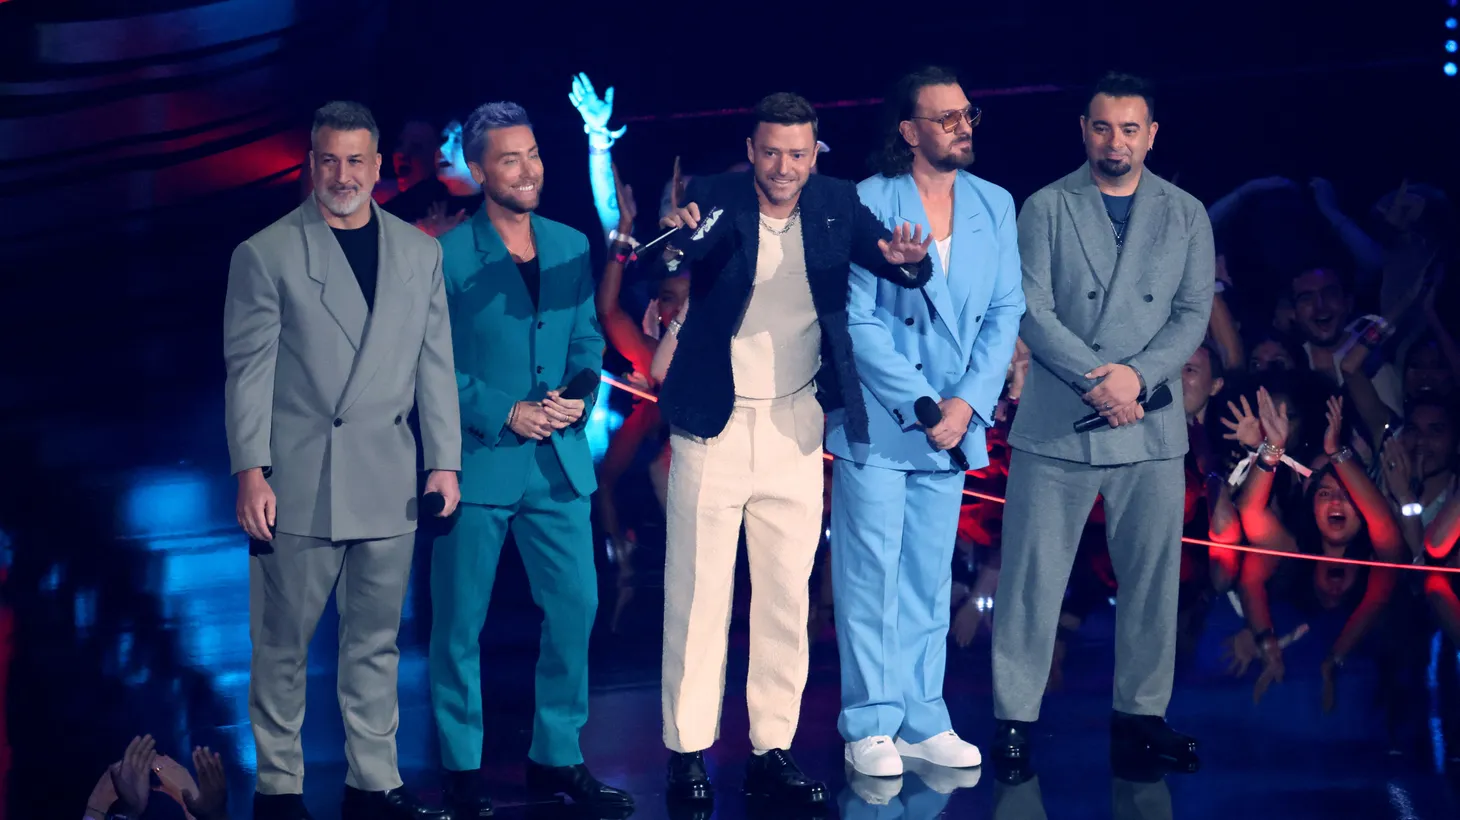 *NSYNC members Justin Timberlake, Joey Fatone, Chris Kirkpatrick, Lance Bass and JC Chasez attend the 2023 MTV Video Music Awards at the Prudential Center in Newark, New Jersey, U.S., September 12, 2023.